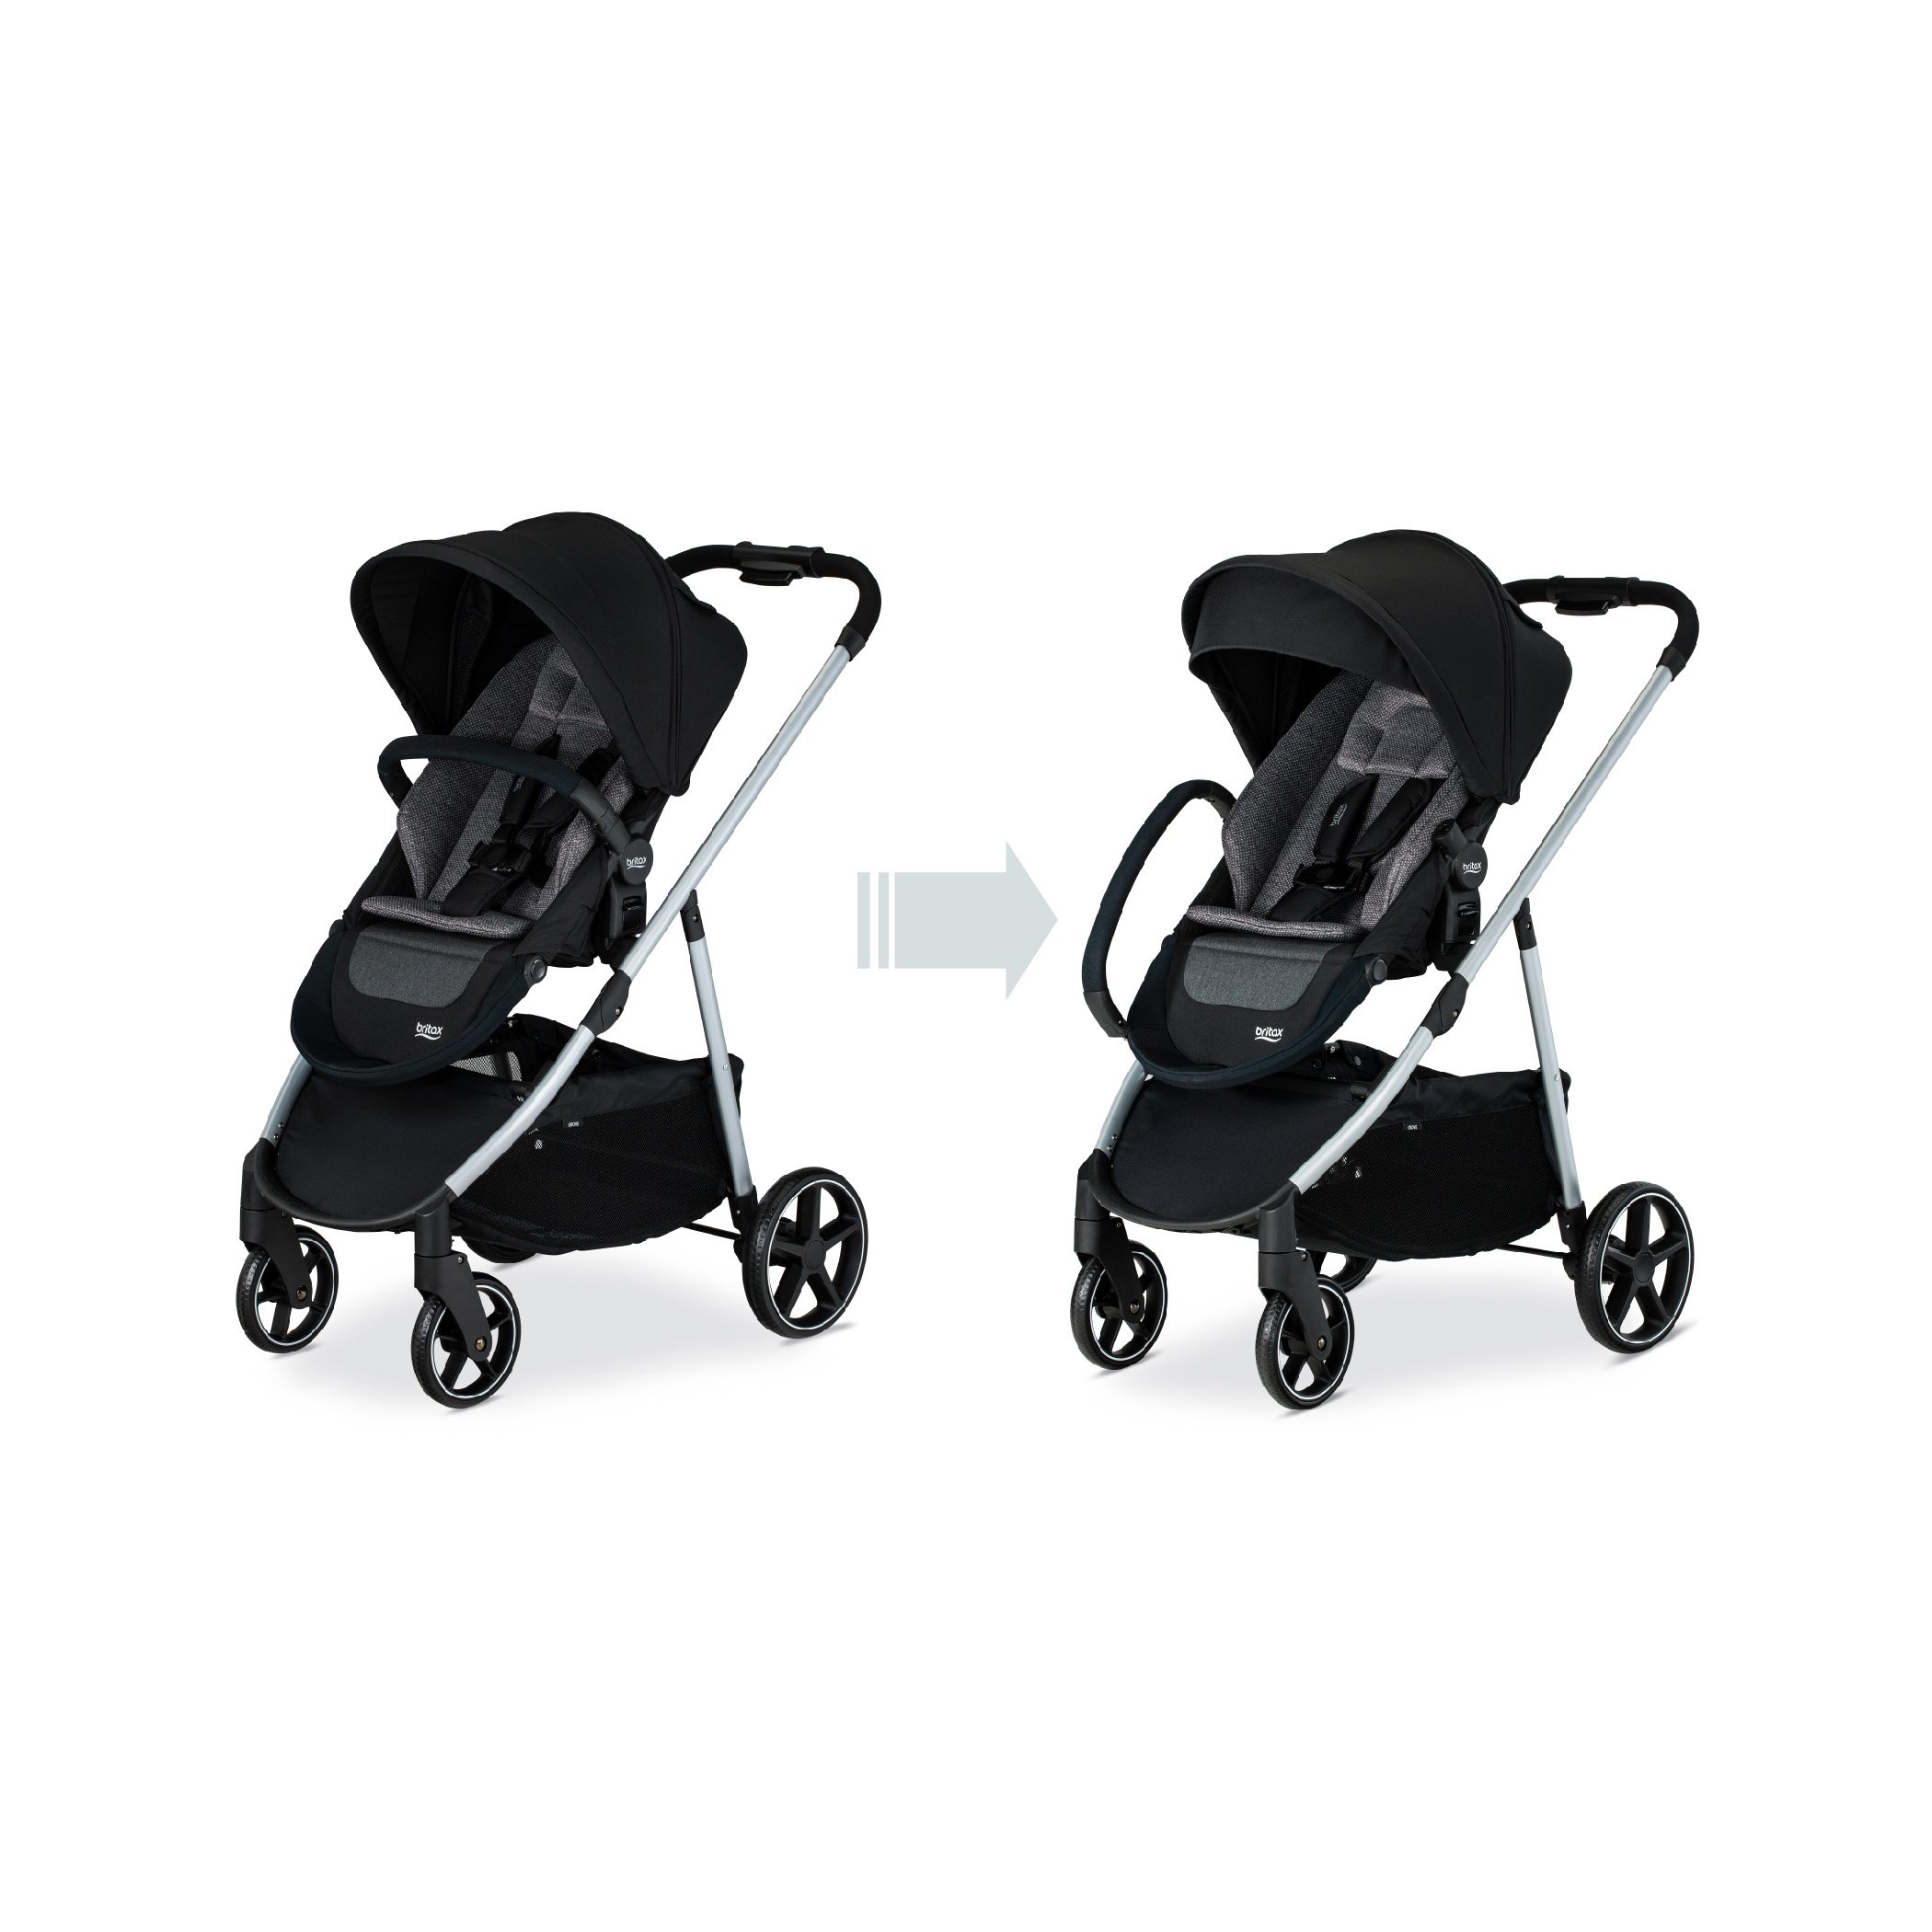 Removal of Bumper Bar from Stroller